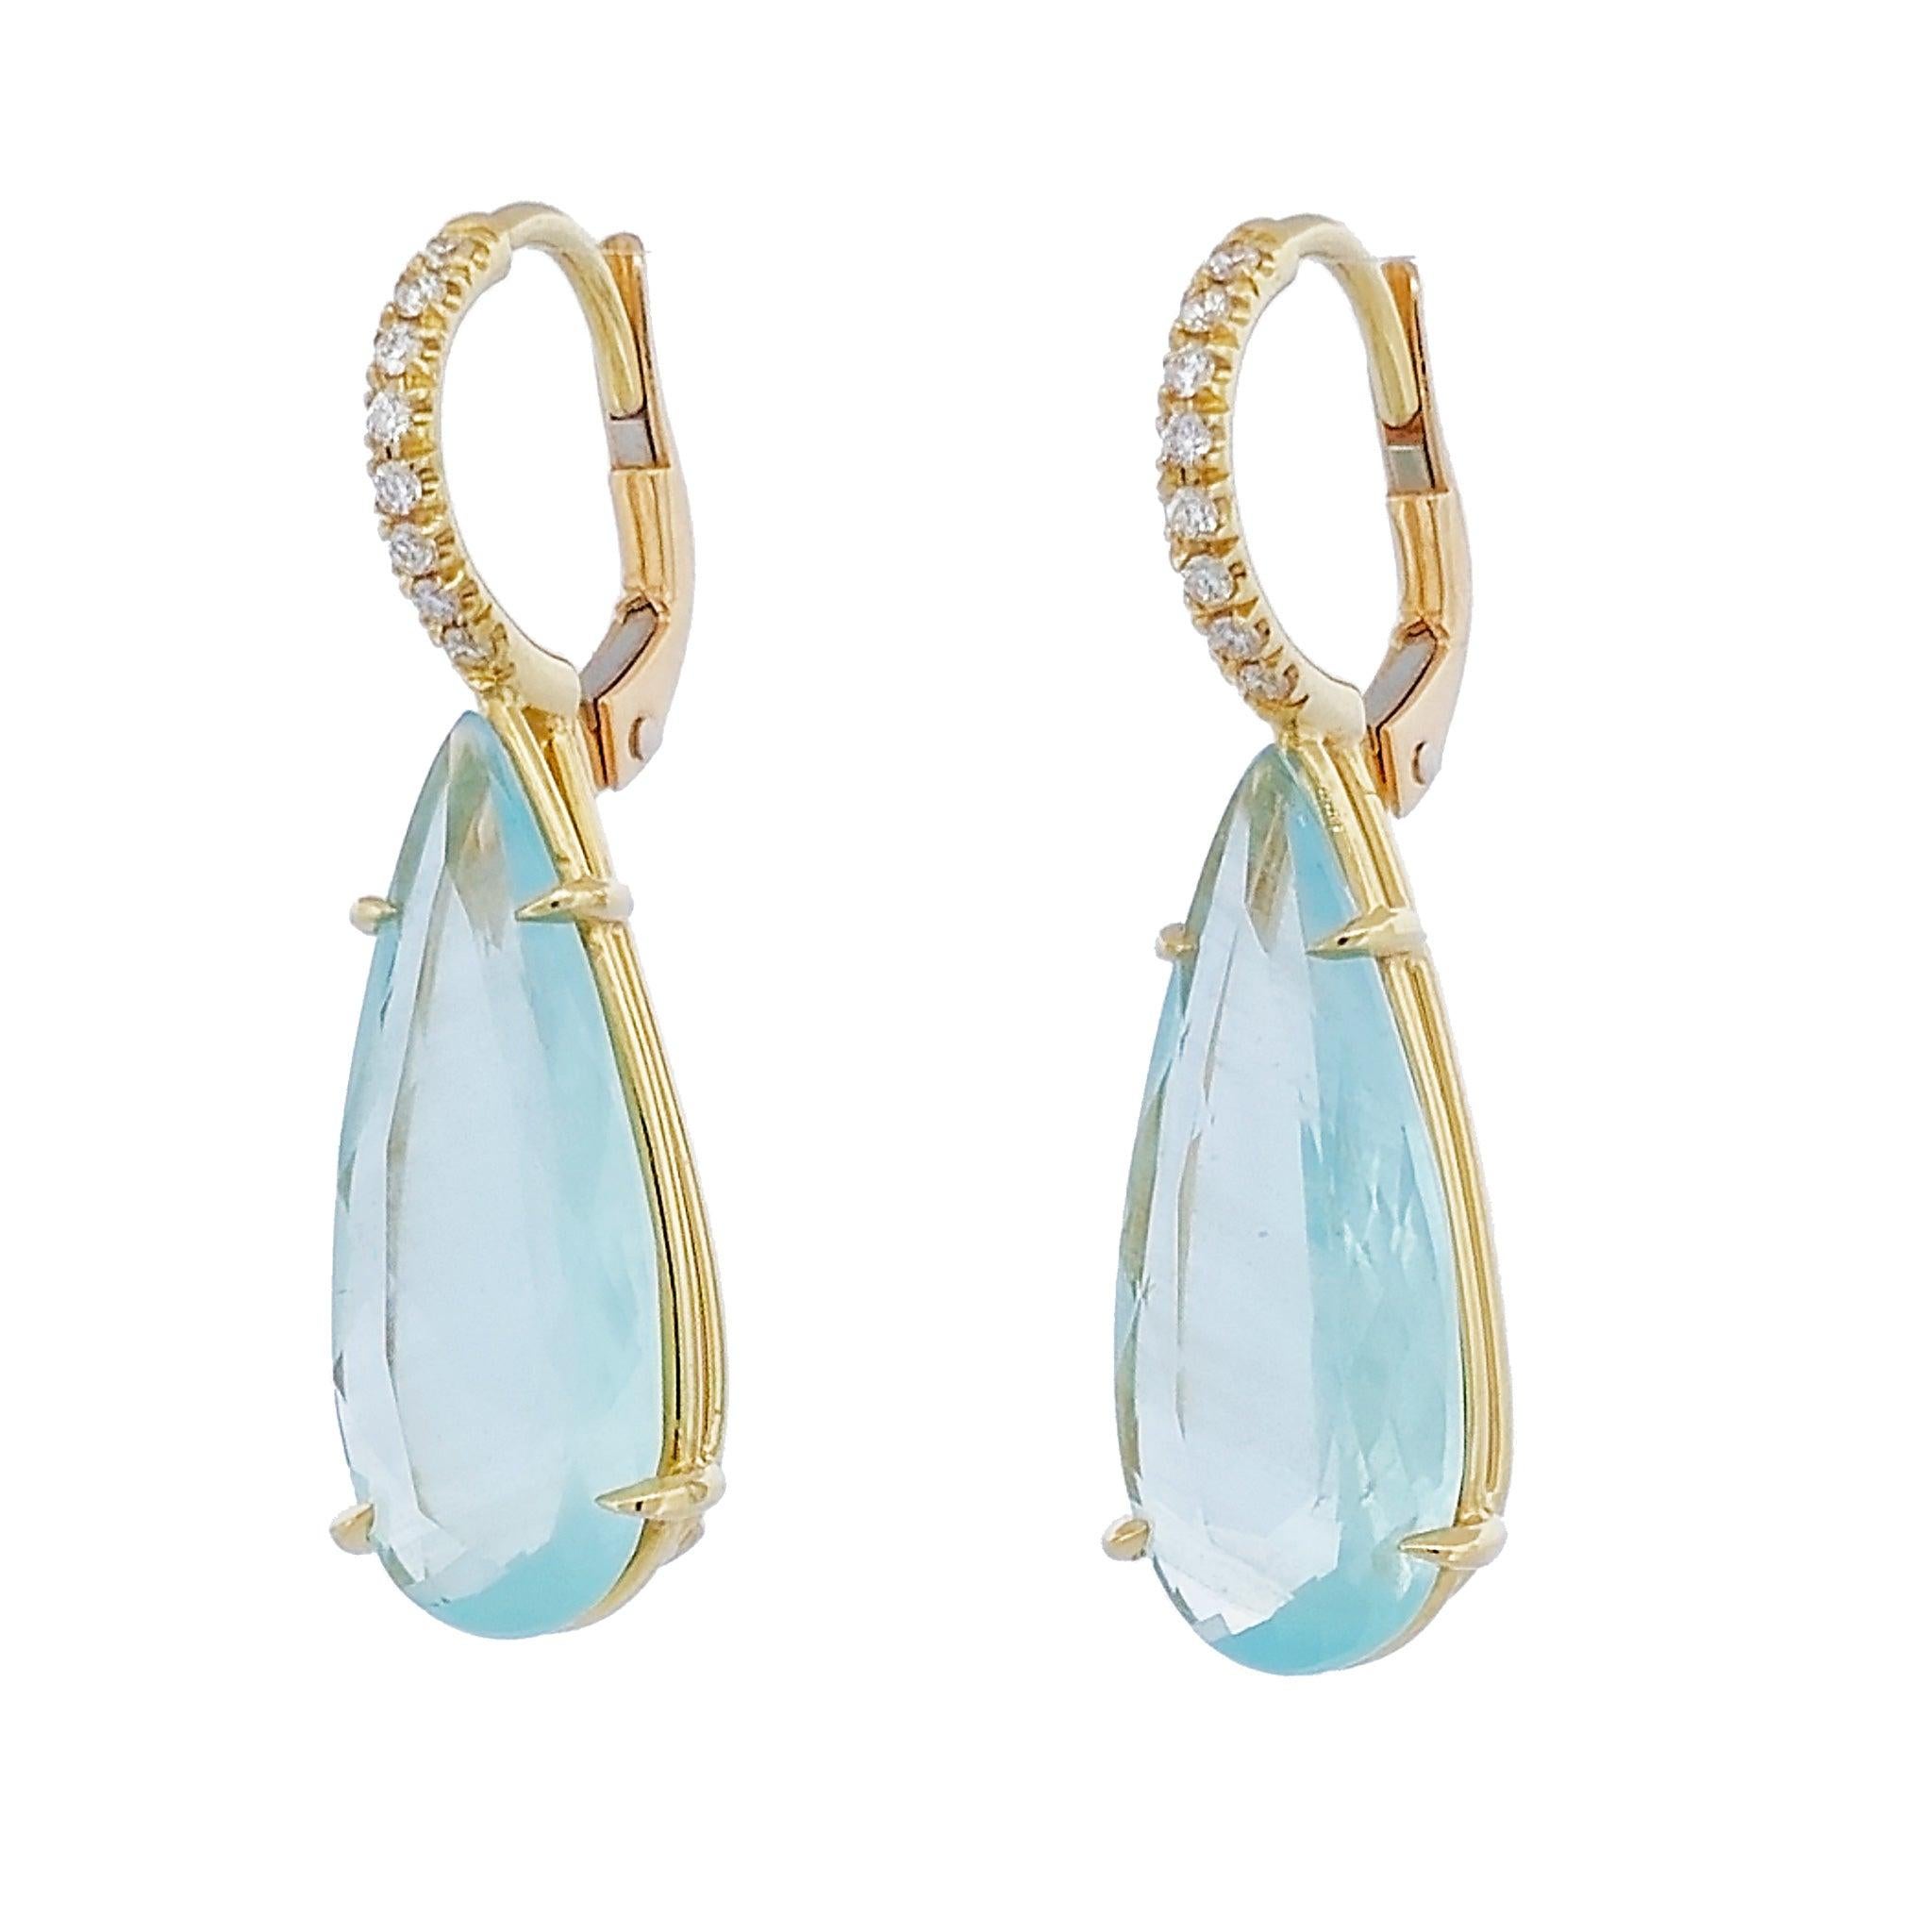 This exquisite pair of drop earrings feature natural milky aquamarine stones of 8.39ct weight, along with 16 pieces of diamond pave up the bail of 0.12ct each, F/G VS1 clarity. Handcrafted by the H&H Collection in 18kt yellow gold.
Natural Milky